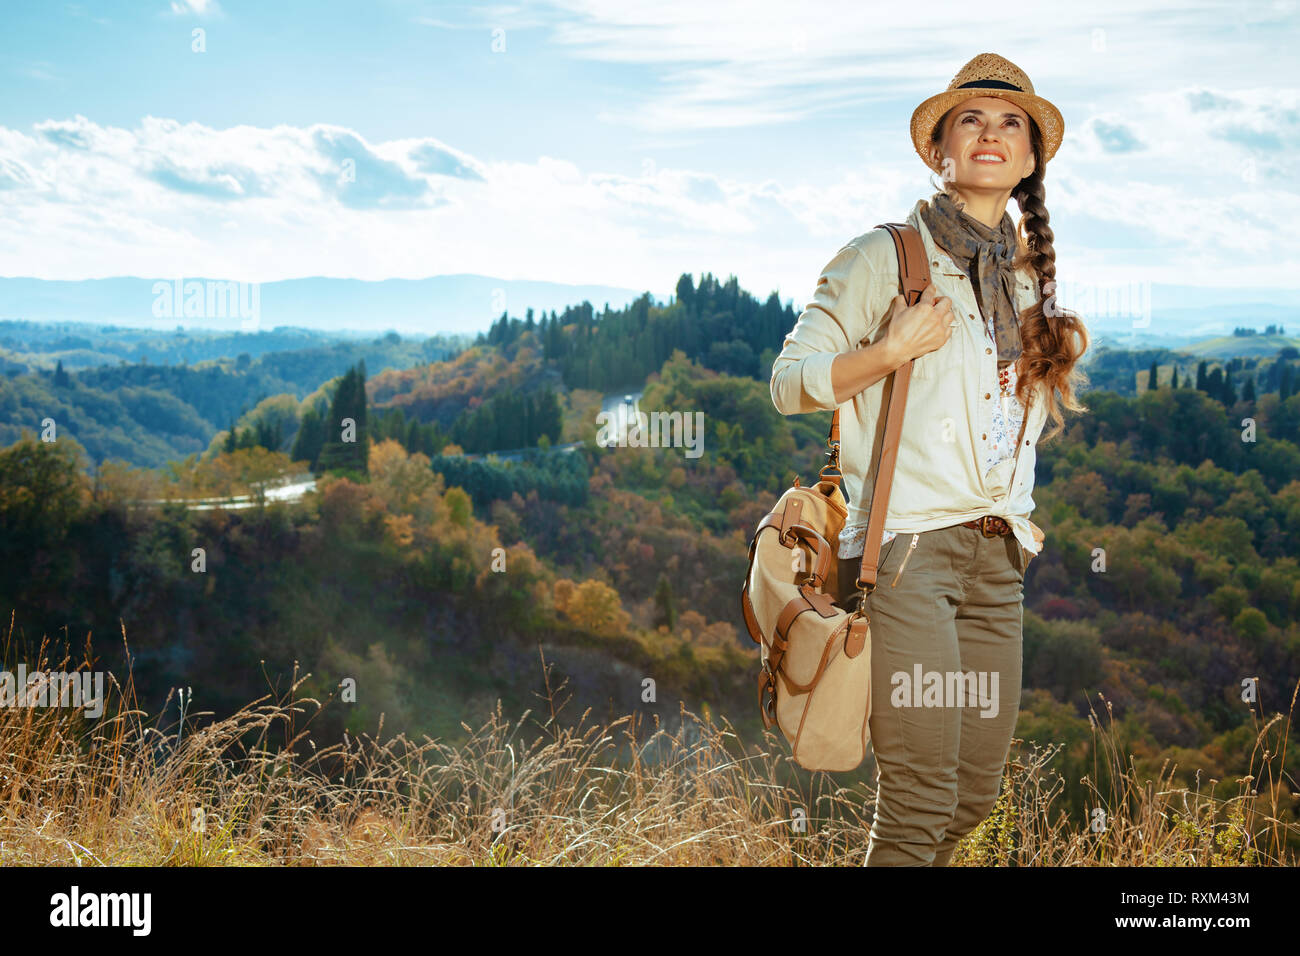 https://c8.alamy.com/comp/RXM43M/smiling-fit-traveller-woman-in-hiking-clothes-with-bag-on-summer-tuscany-trekking-looking-into-the-distance-RXM43M.jpg